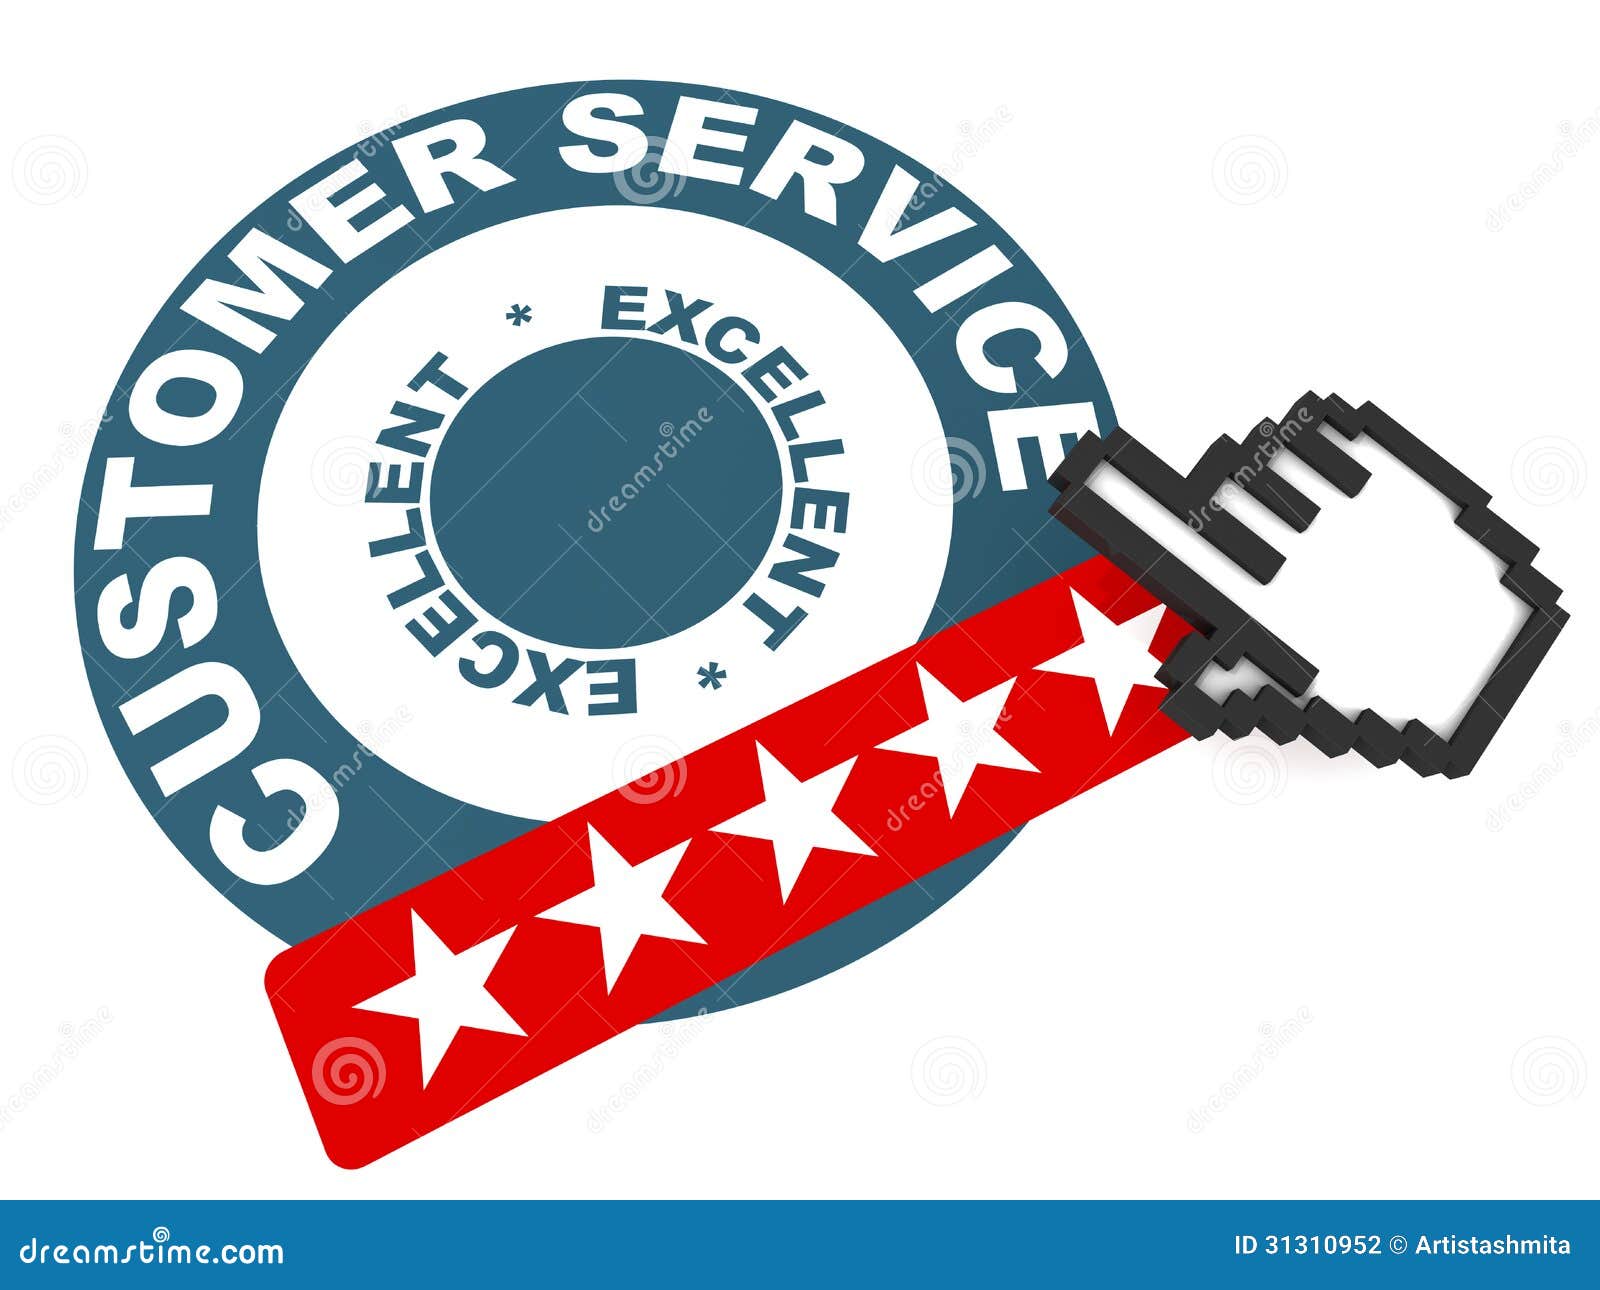 Excellent Customer Service Stock Illustrations 4 742 Excellent Customer Service Stock Illustrations Vectors Clipart Dreamstime